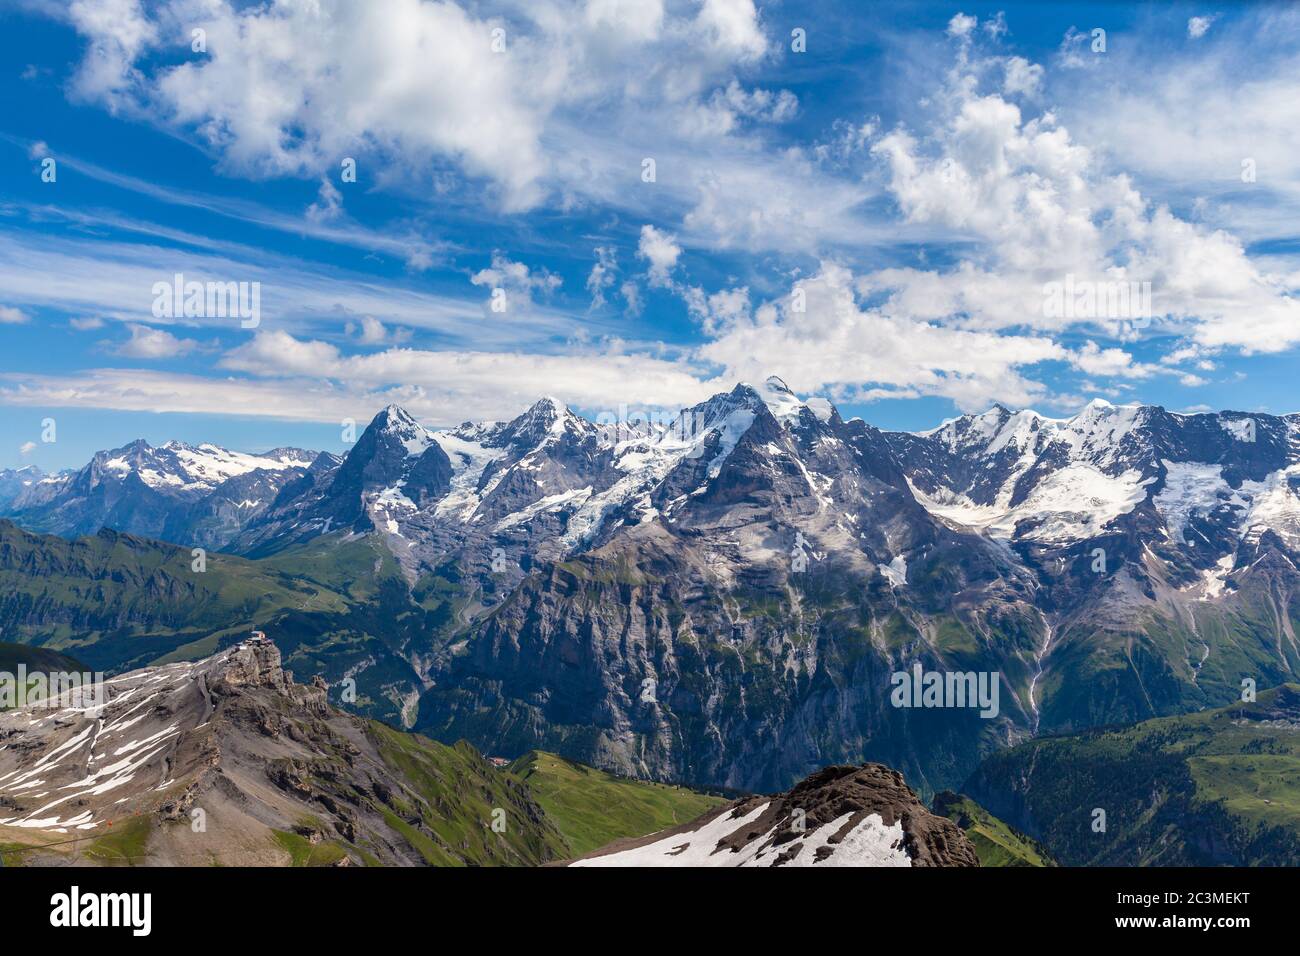 Panorama view of the famous peaks: Eiger, Monch and Jungfrau of Swiss Alps on Bernese Oberland, form top of Schilthorn, Canton of Bern, Switzerland. Stock Photo